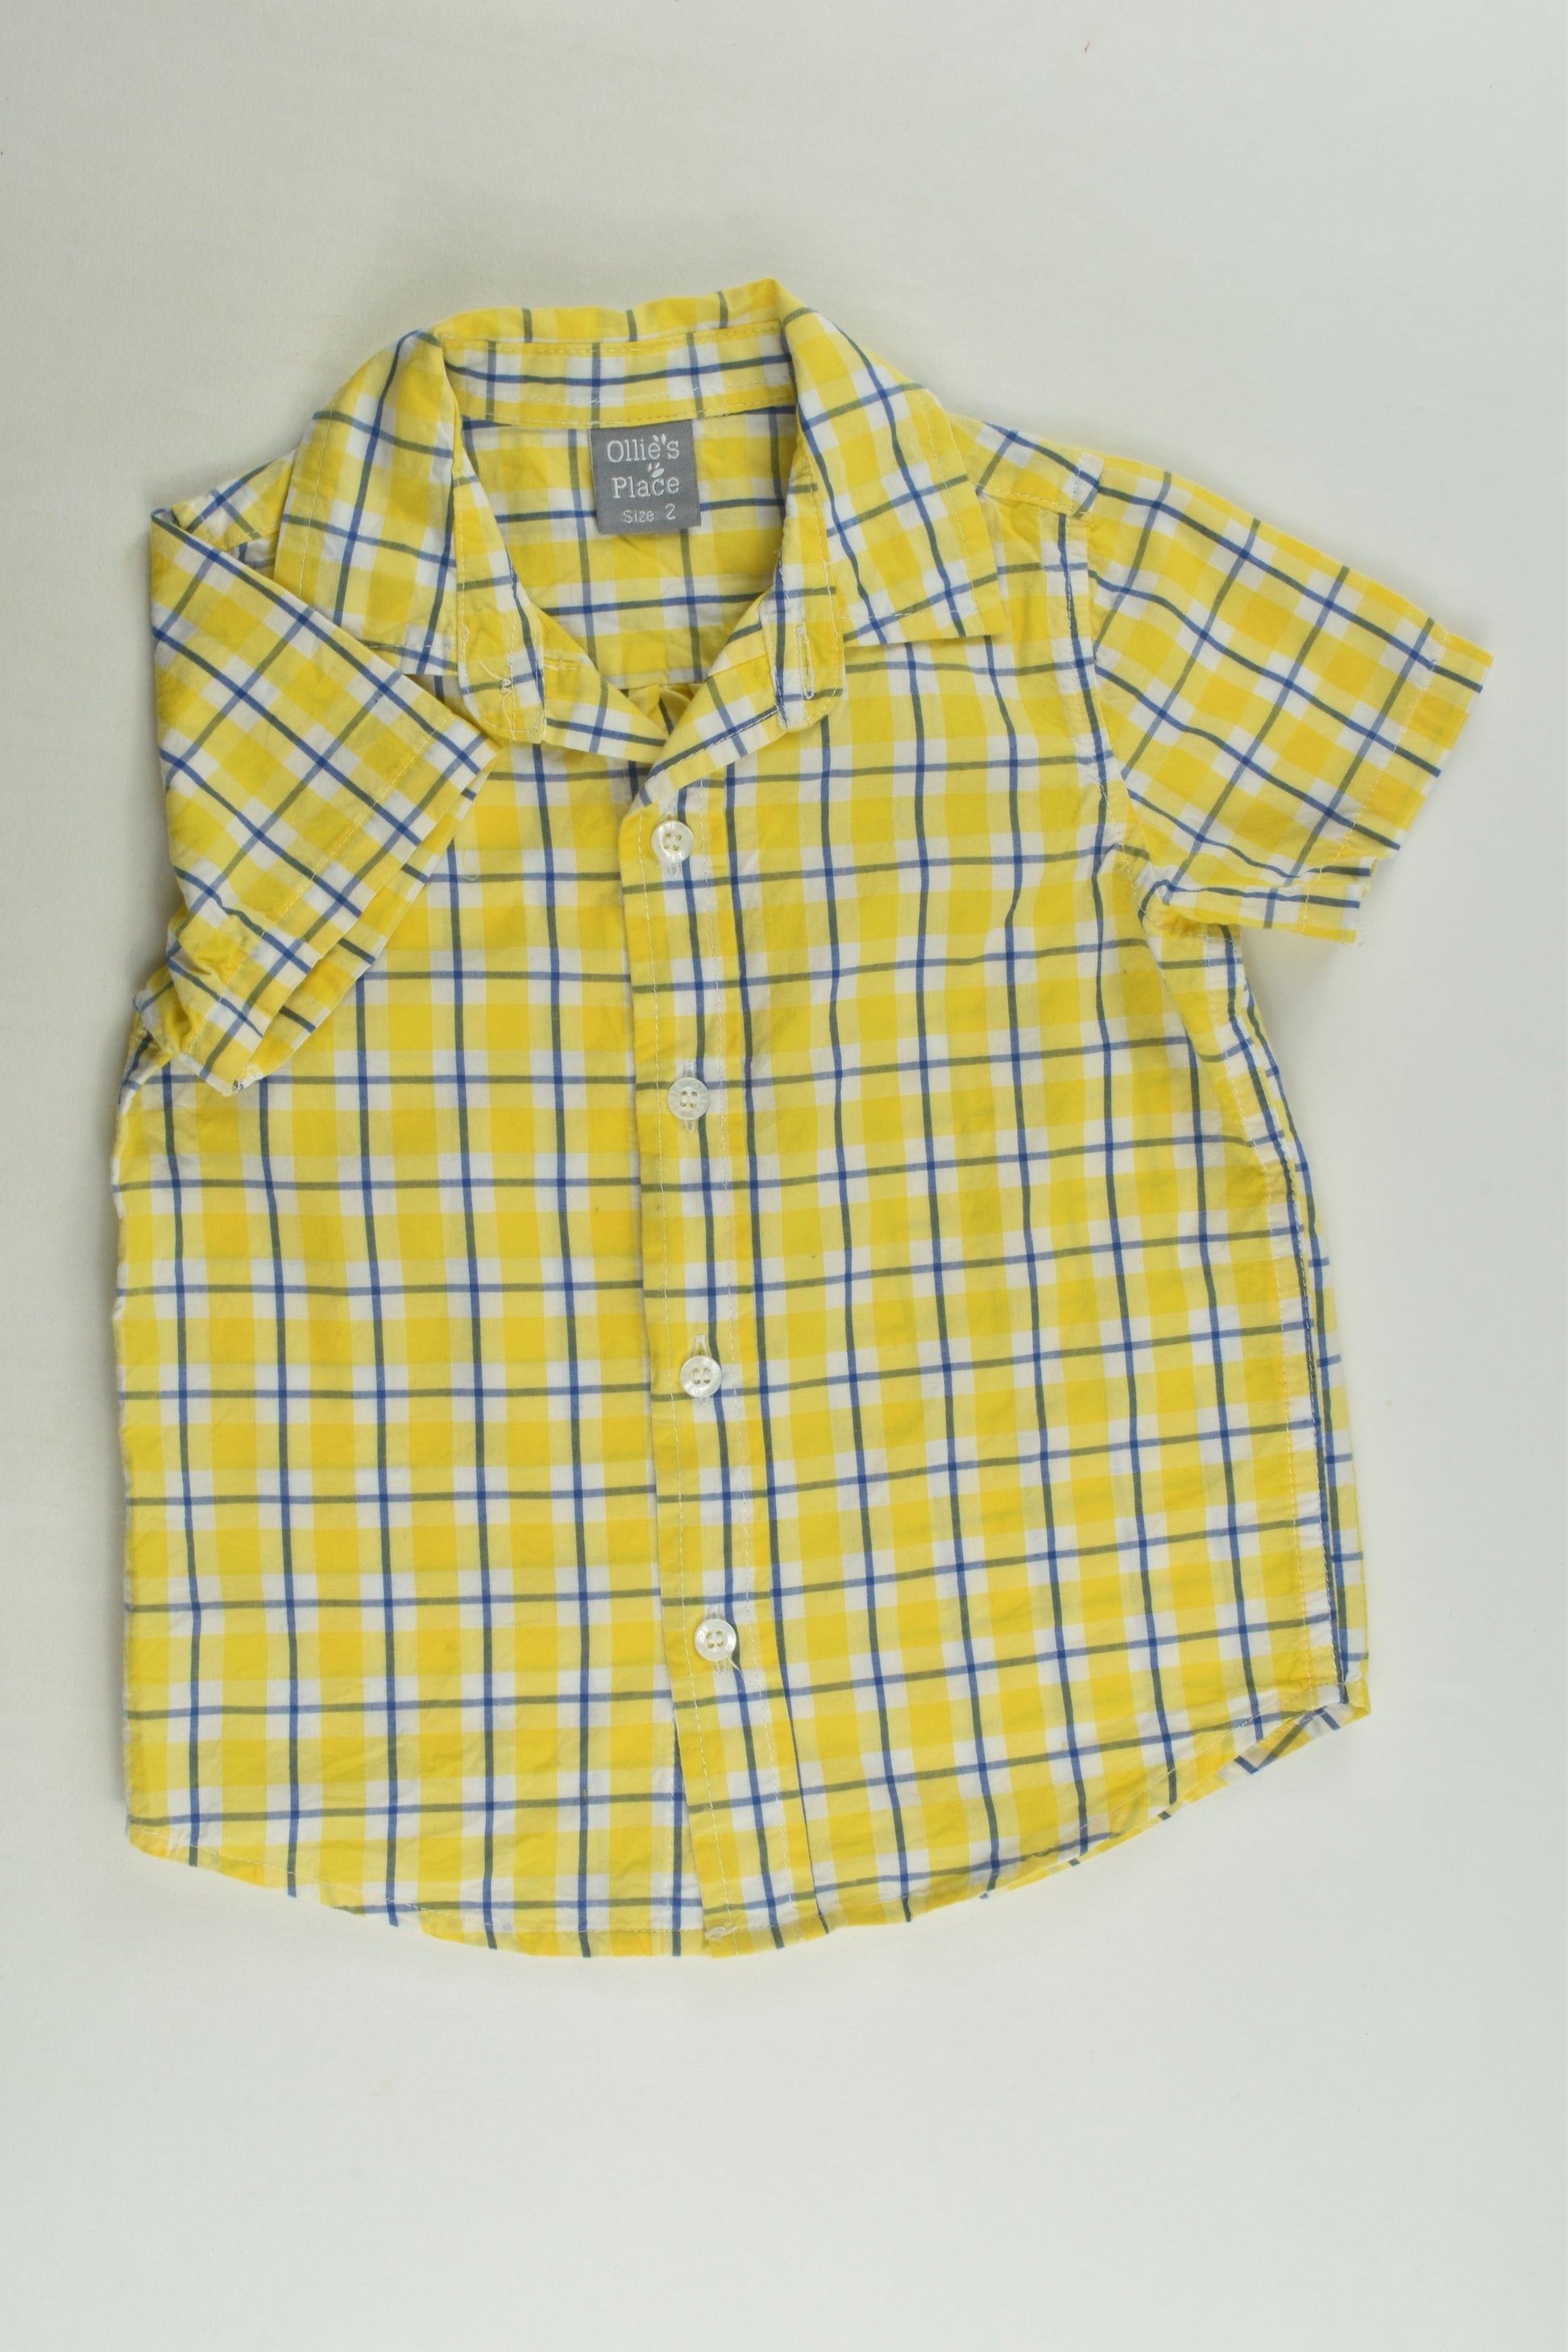 Ollie's Place Size 2 Shirt